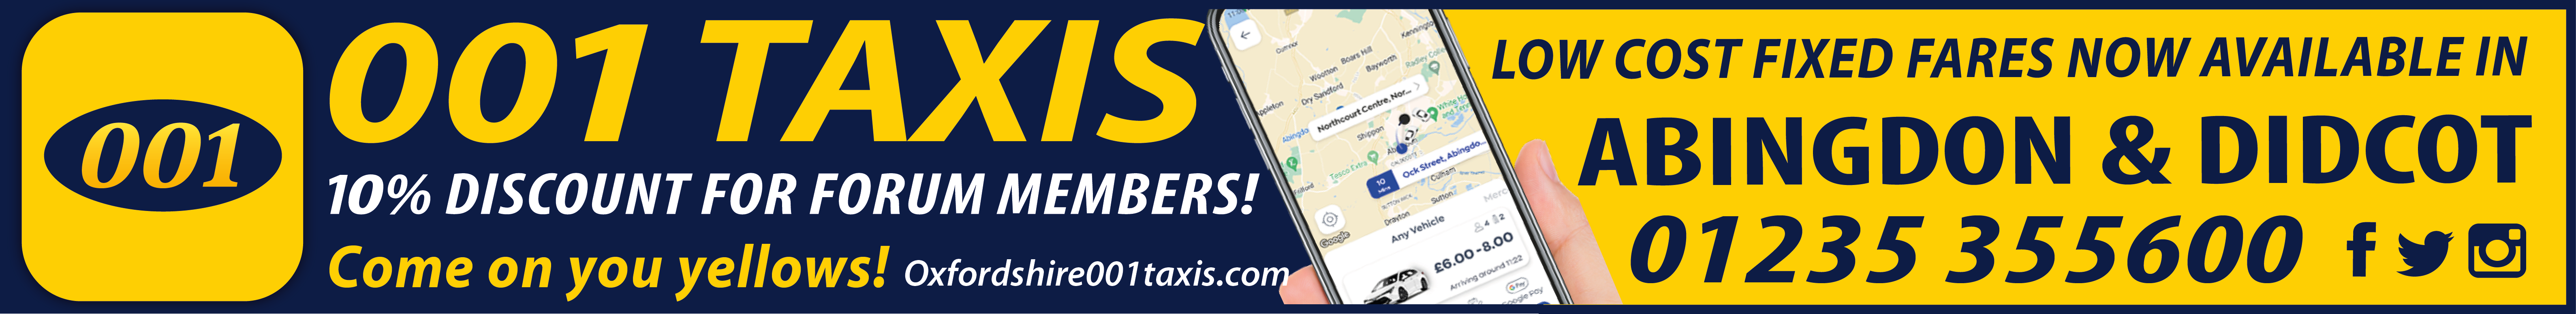 001 Taxis - 10% discount for forum members